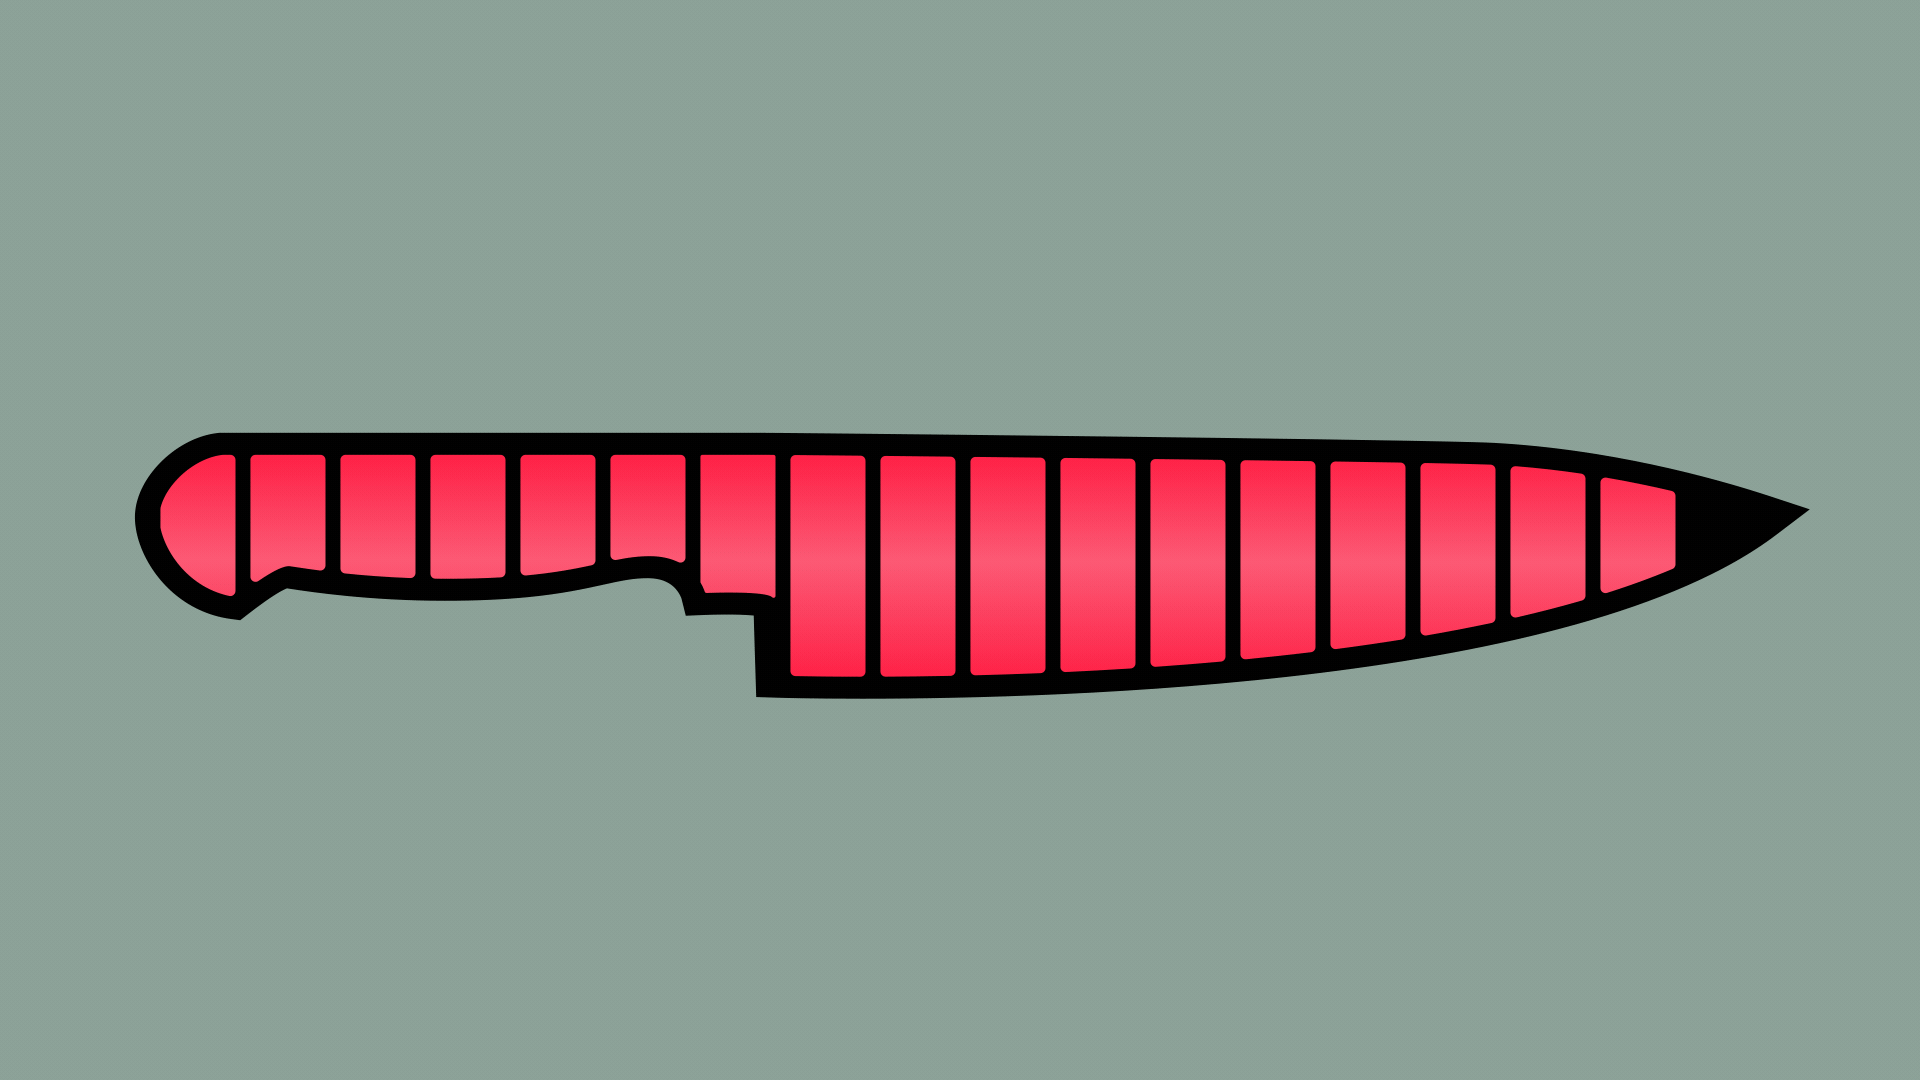 Illustration of an animated video-game style health bar shaped like a chef's knife.